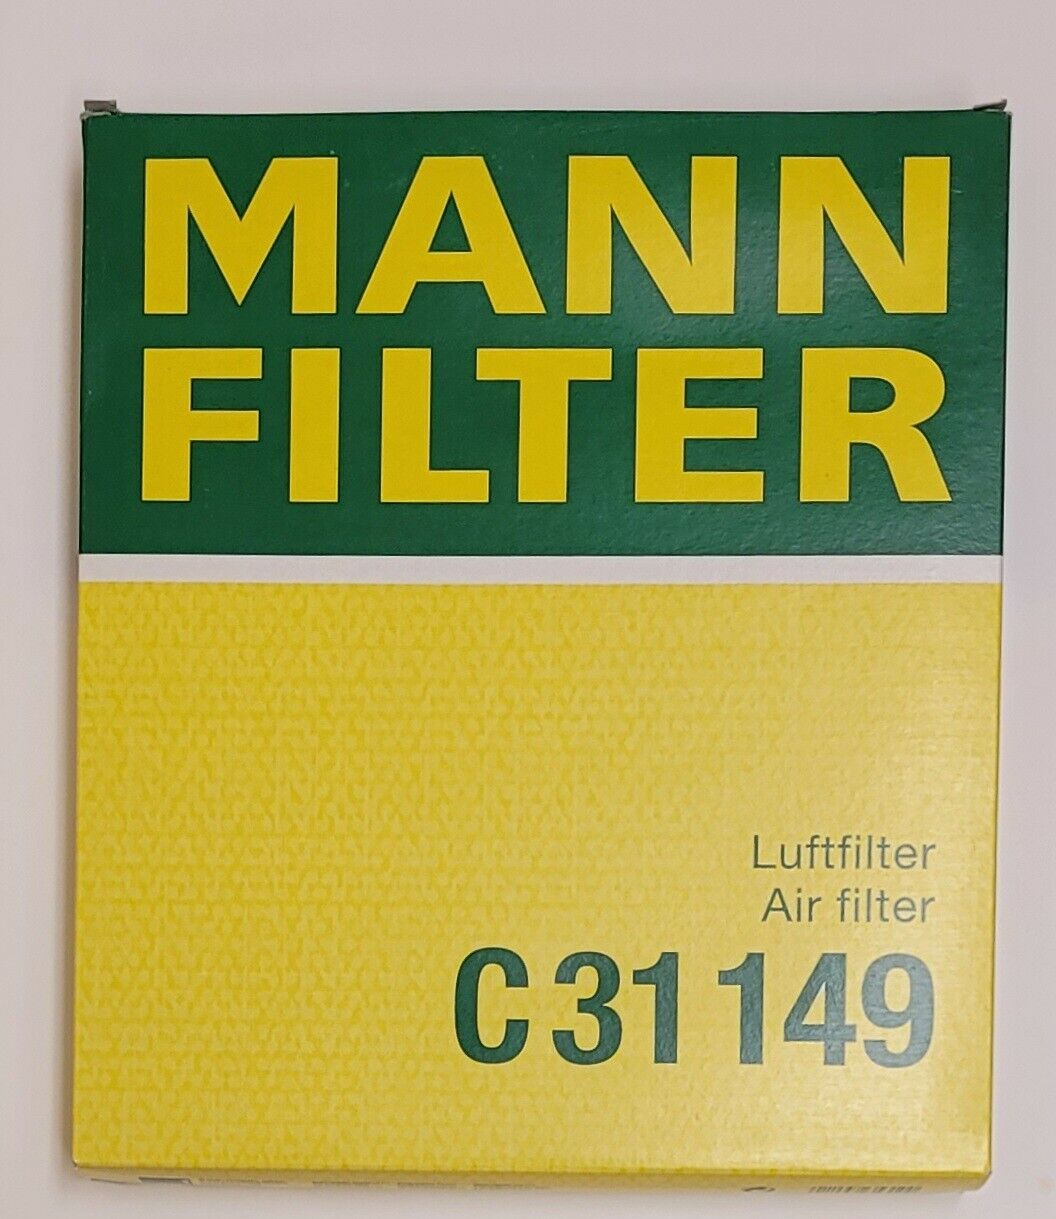 NEW Air Filter MANN C31149 for BMW Germany